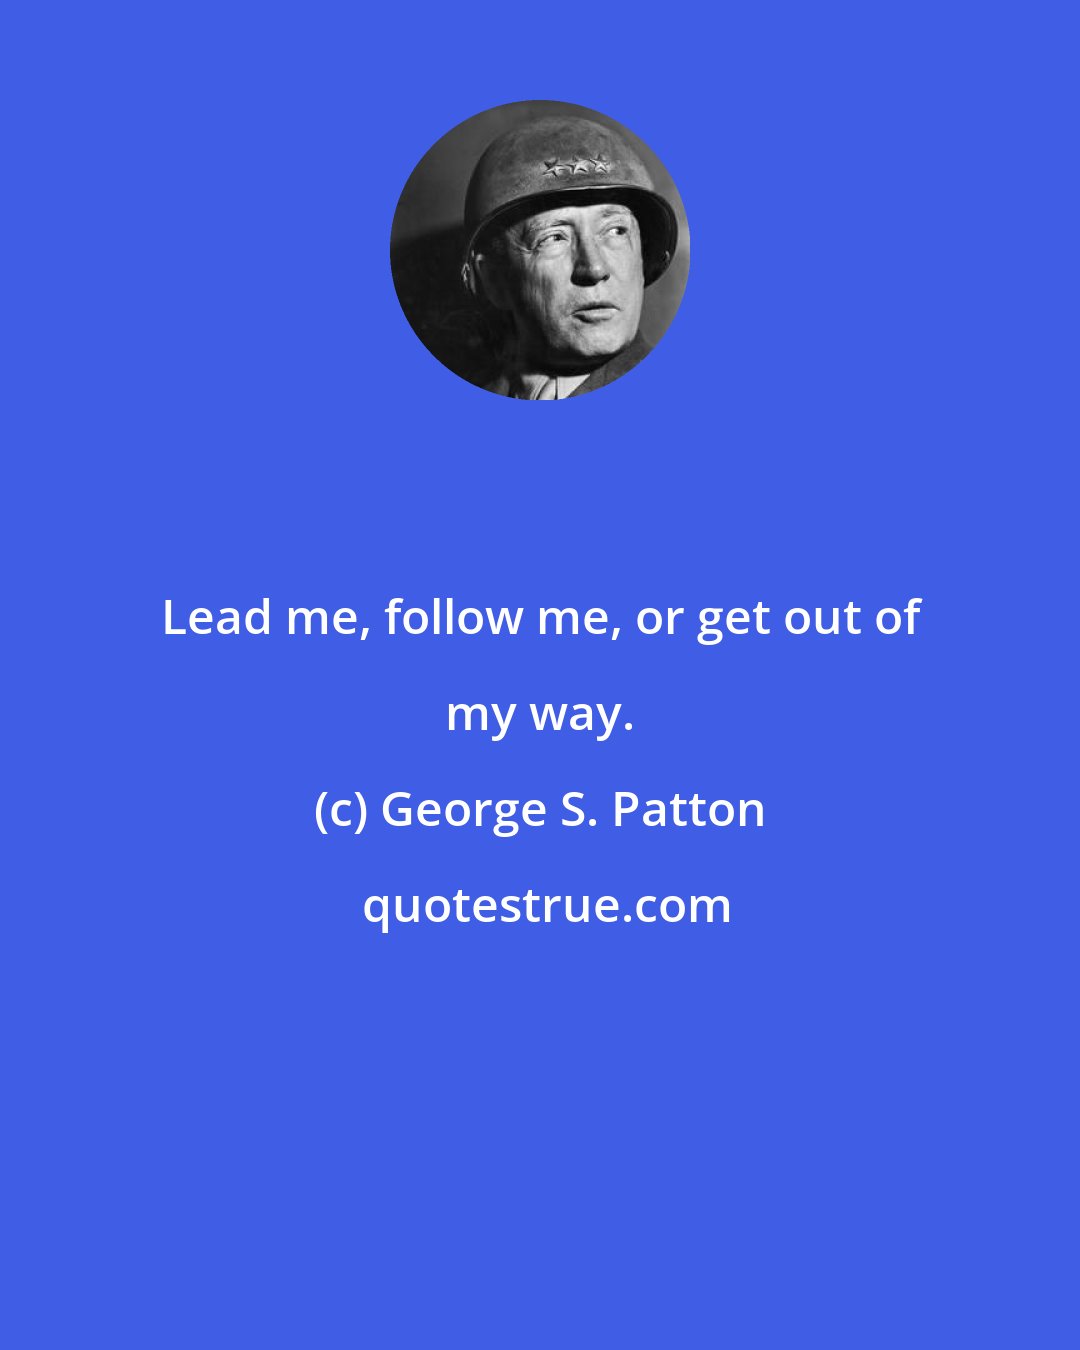 George S. Patton: Lead me, follow me, or get out of my way.